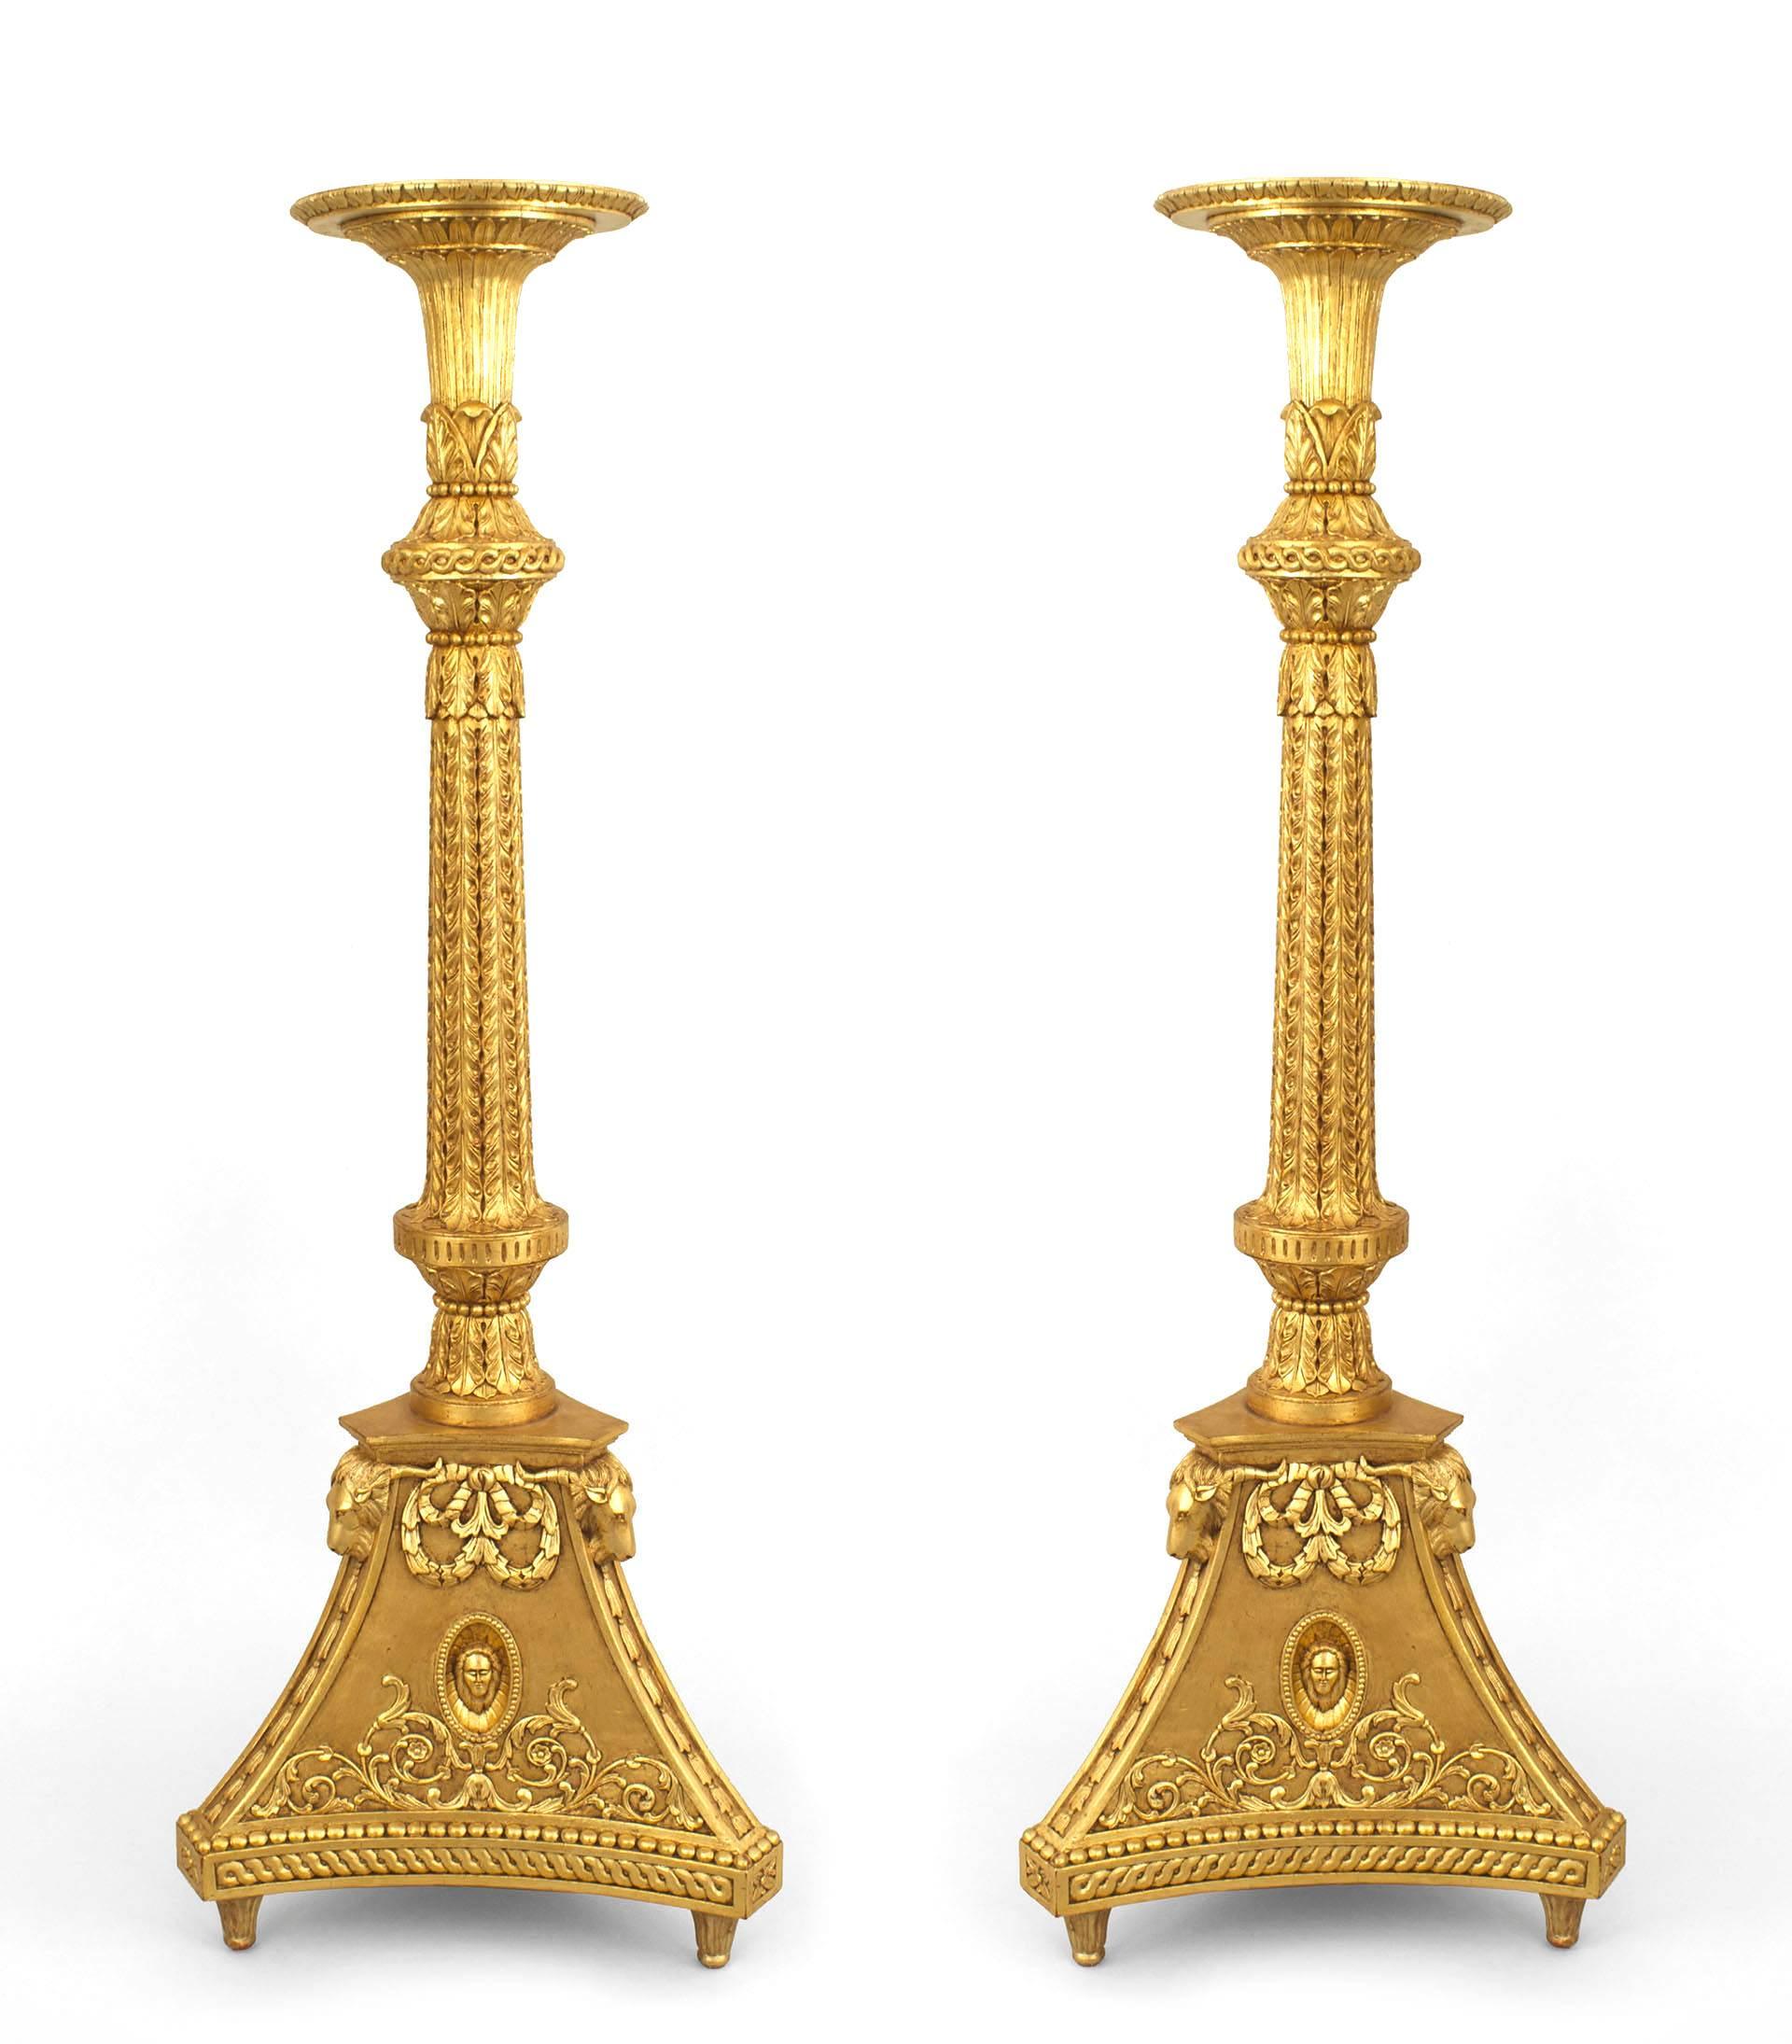 Pair of English Adam style (20th Cent) gilt wood carved pedestals having a solid triangular base.
